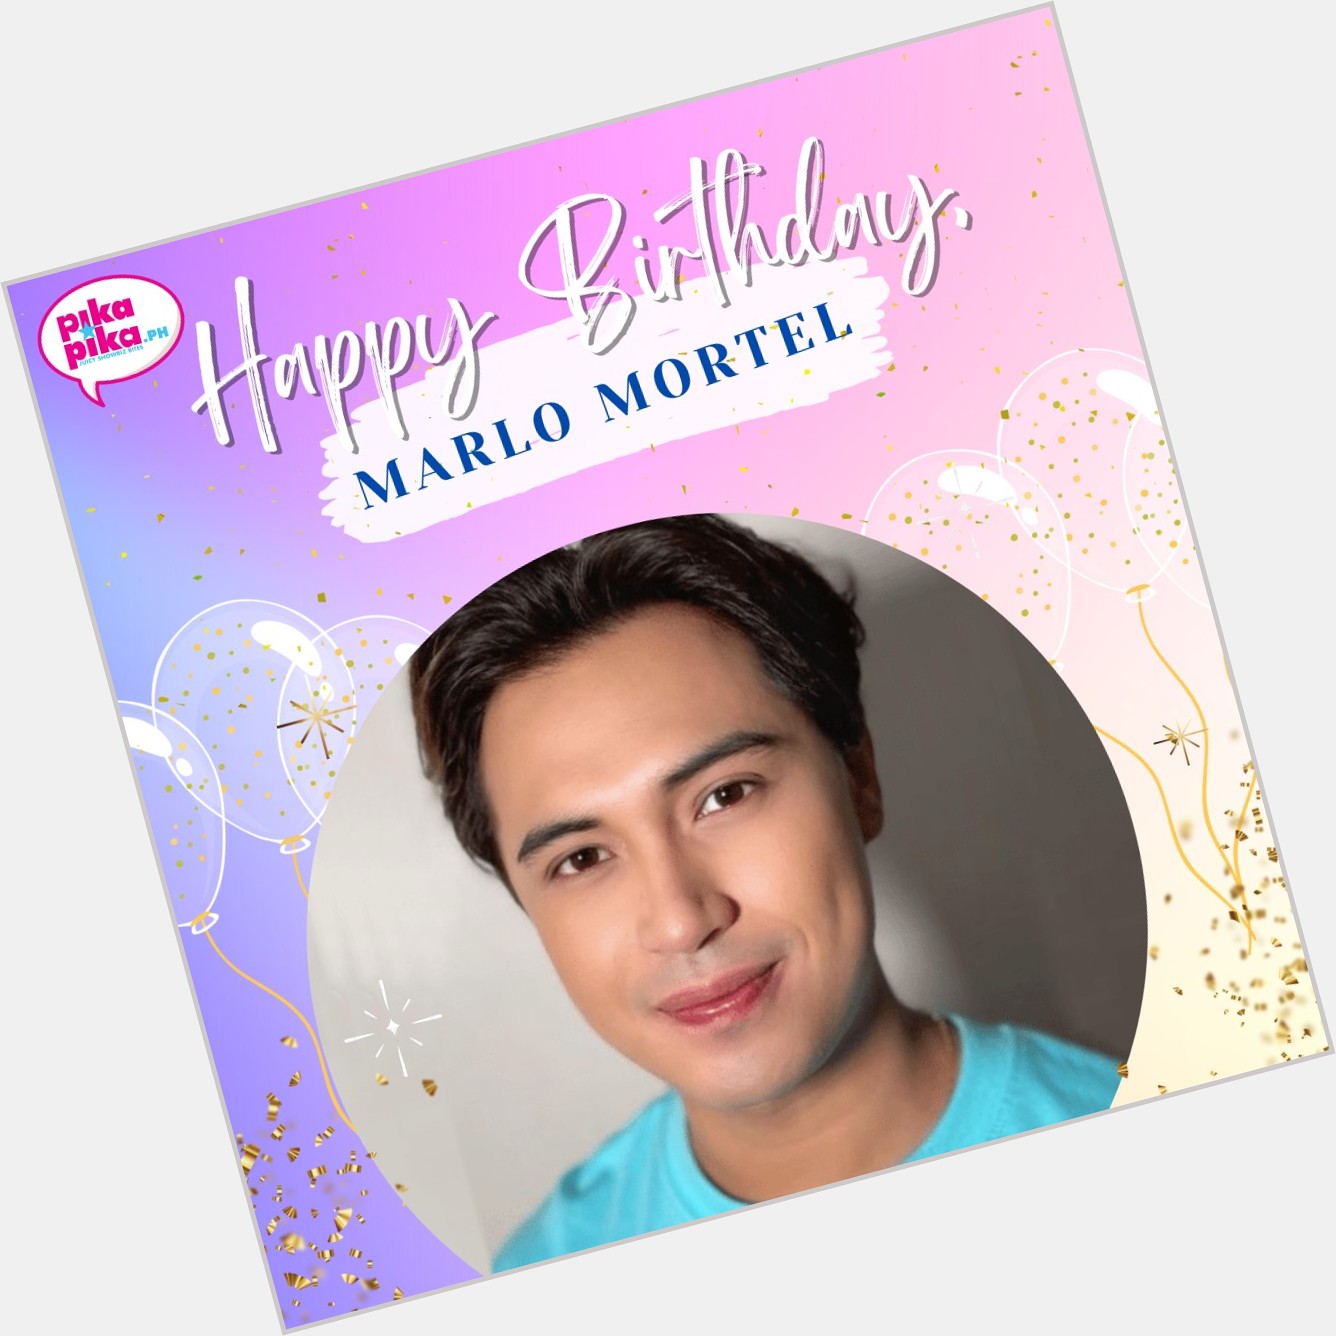 Happy birthday, Marlo Mortel! May your special day be filled with love and cheers.    